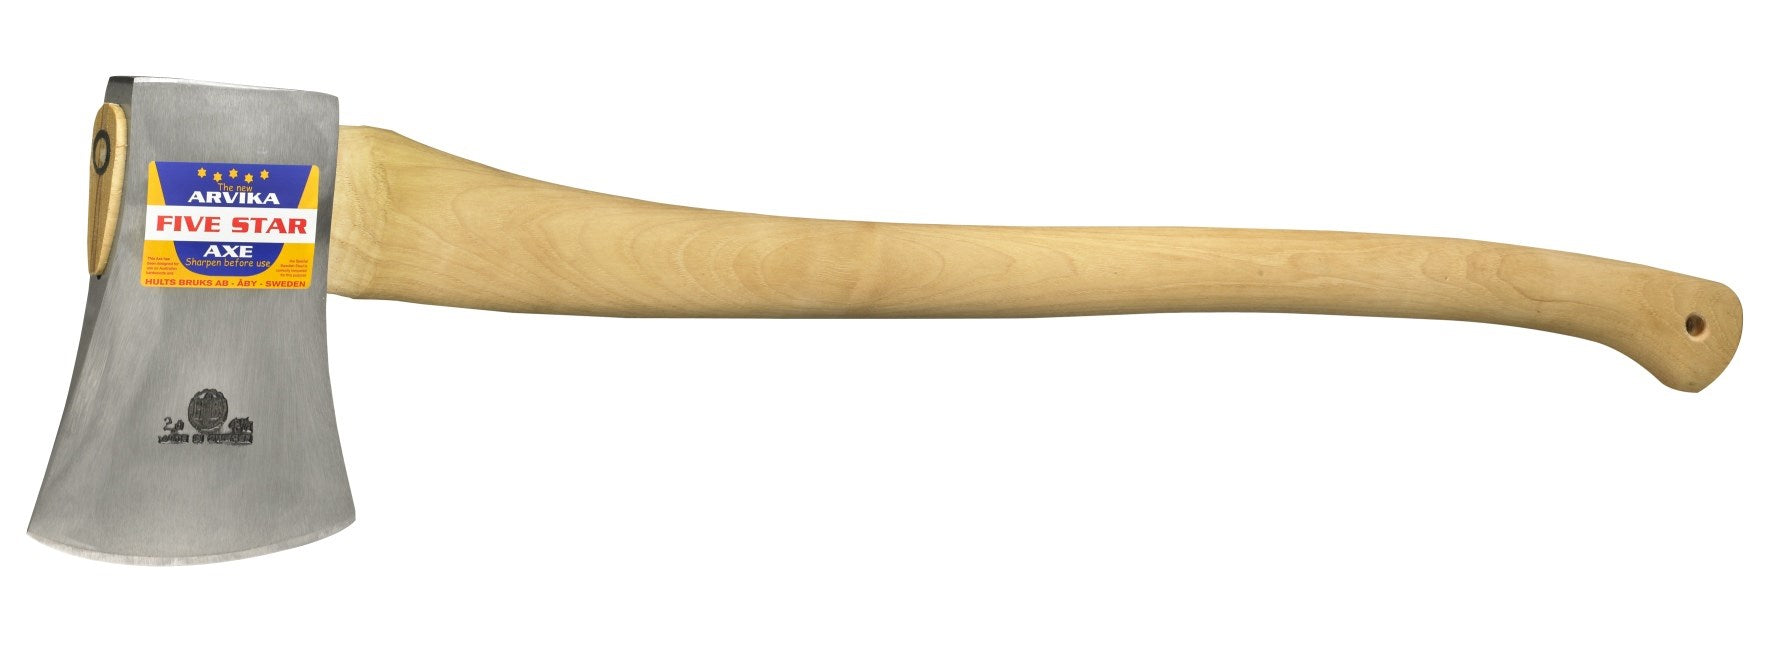 Arvika Large Agdor Felling Axe. The axe head is a stainless steel look and the shaft appears to be made out of maple.